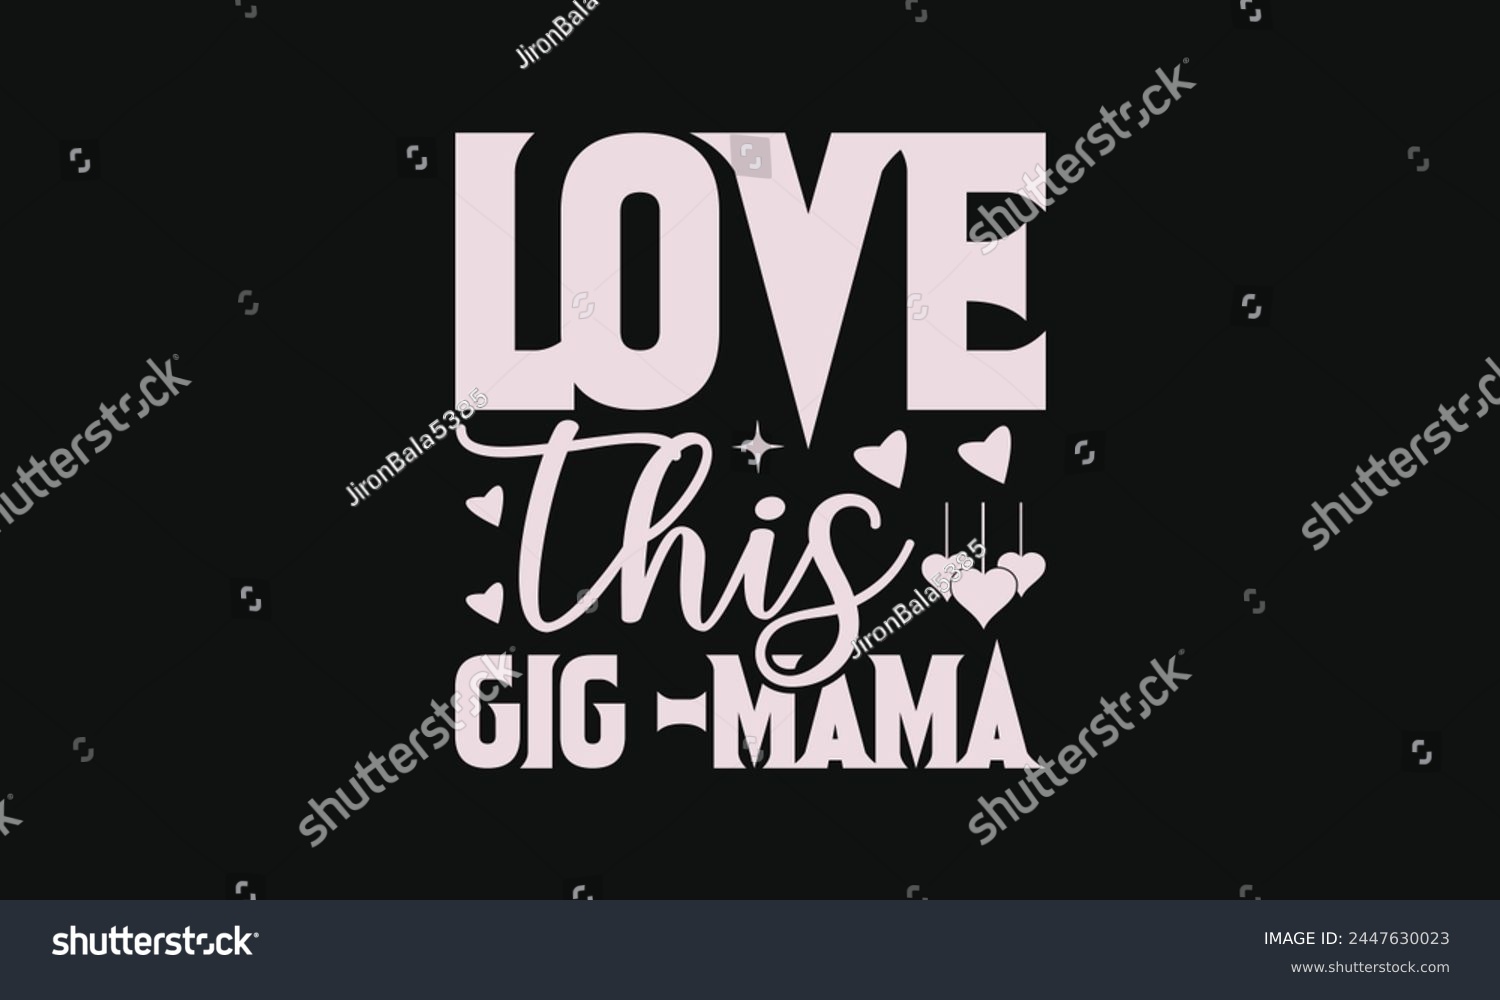 SVG of  Love this gig -mama - MOM T-shirt Design,  Isolated on white background, This illustration can be used as a print on t-shirts and bags, cover book, templet, stationary or as a poster. svg